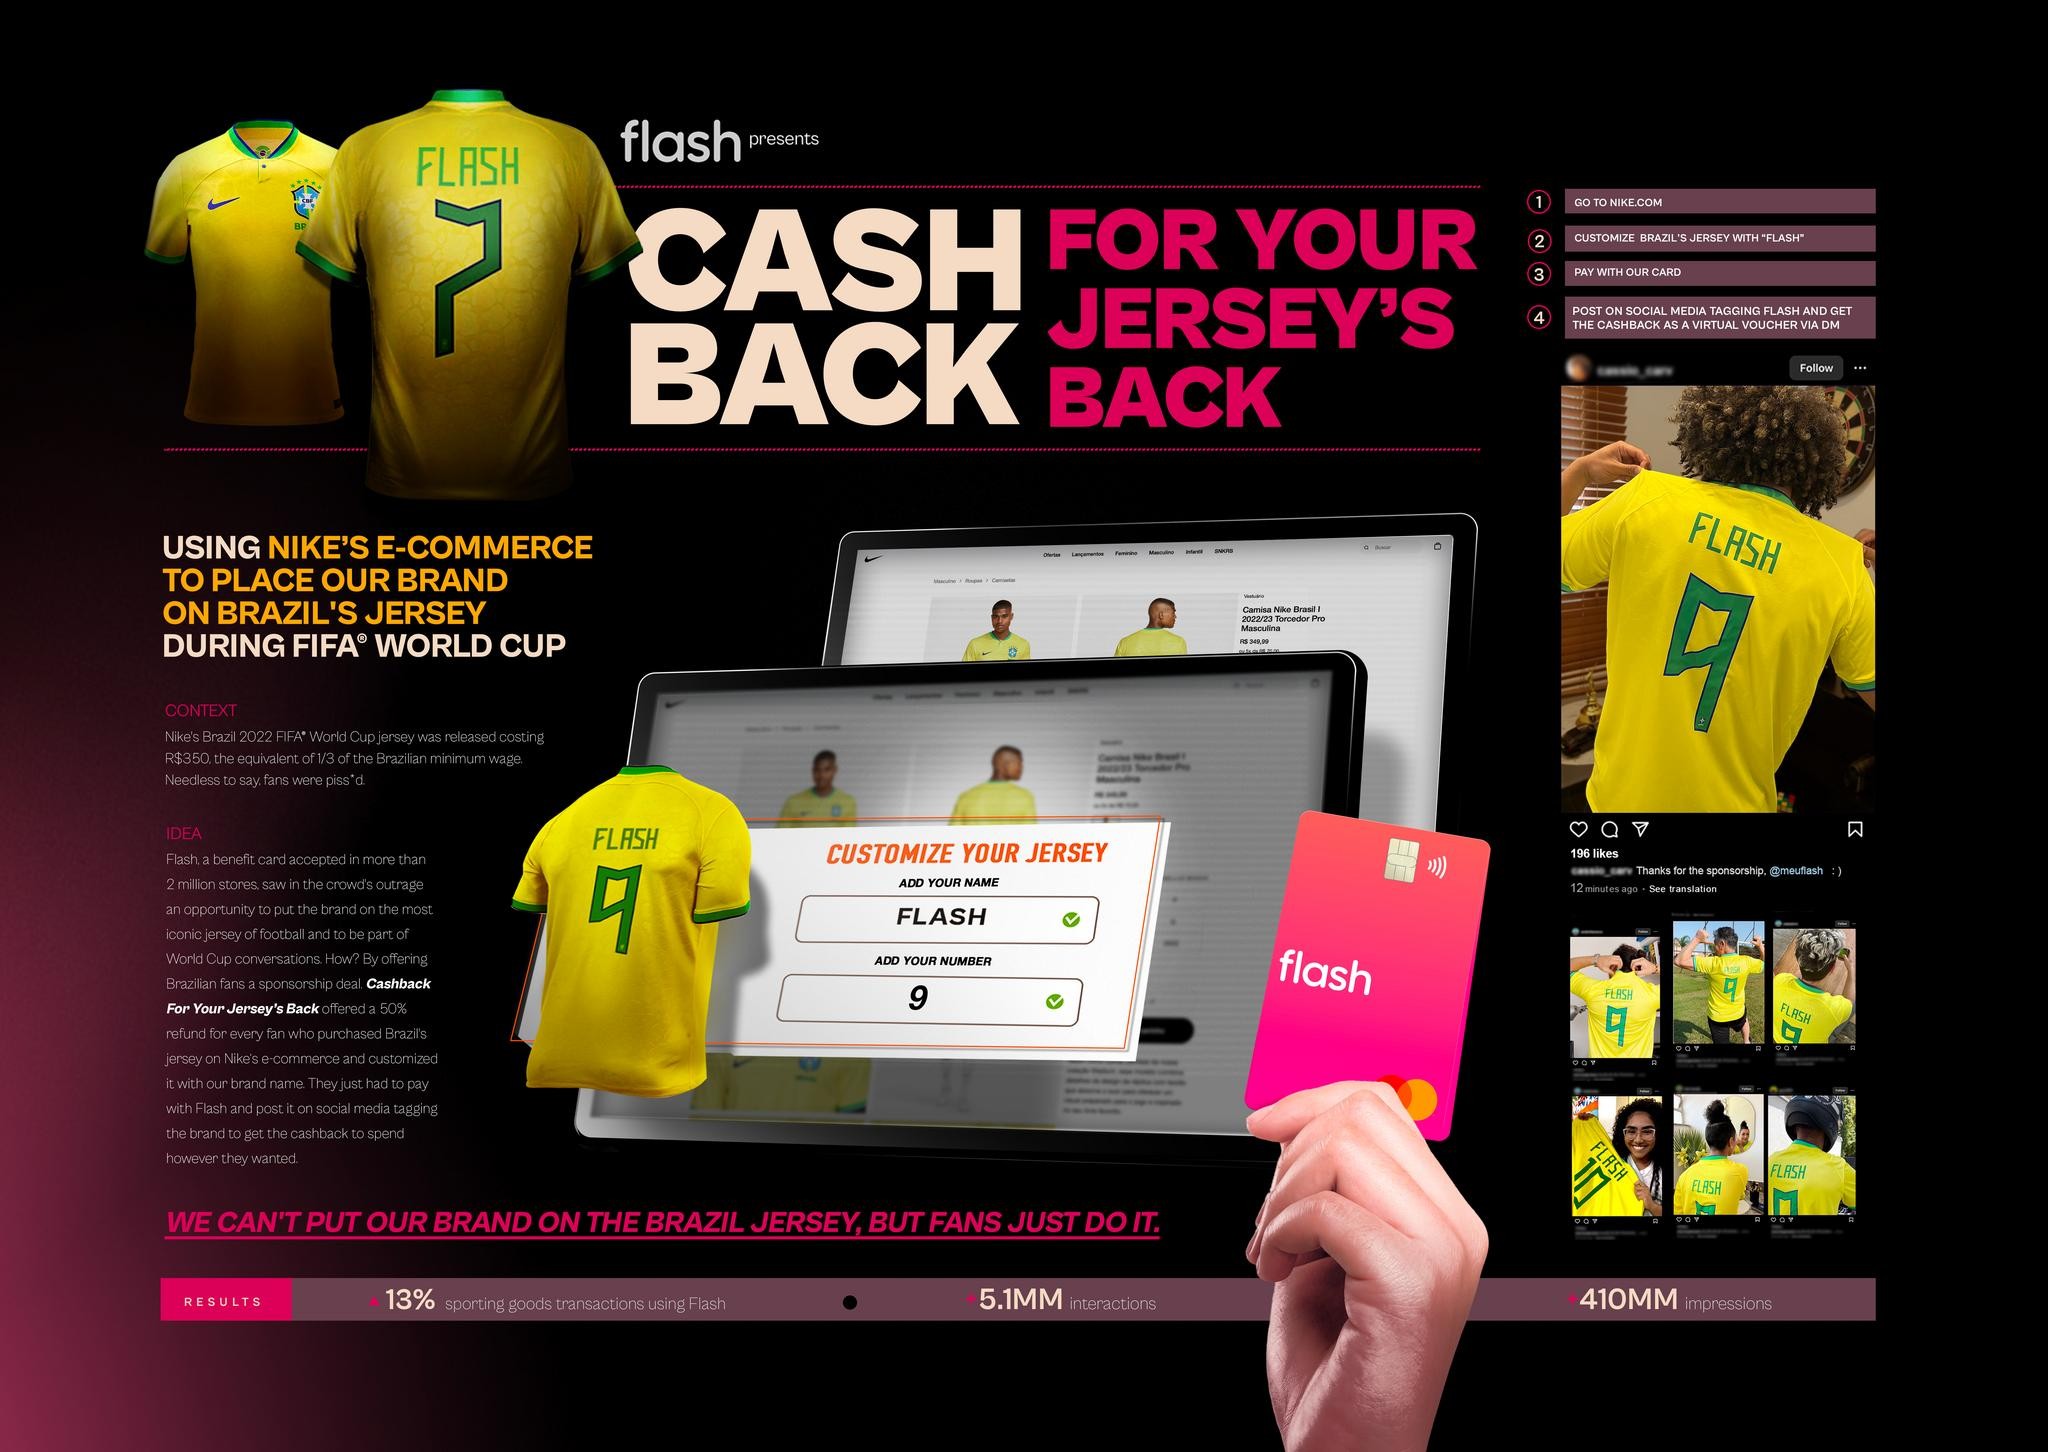 Cashback for Your Jersey’s Back